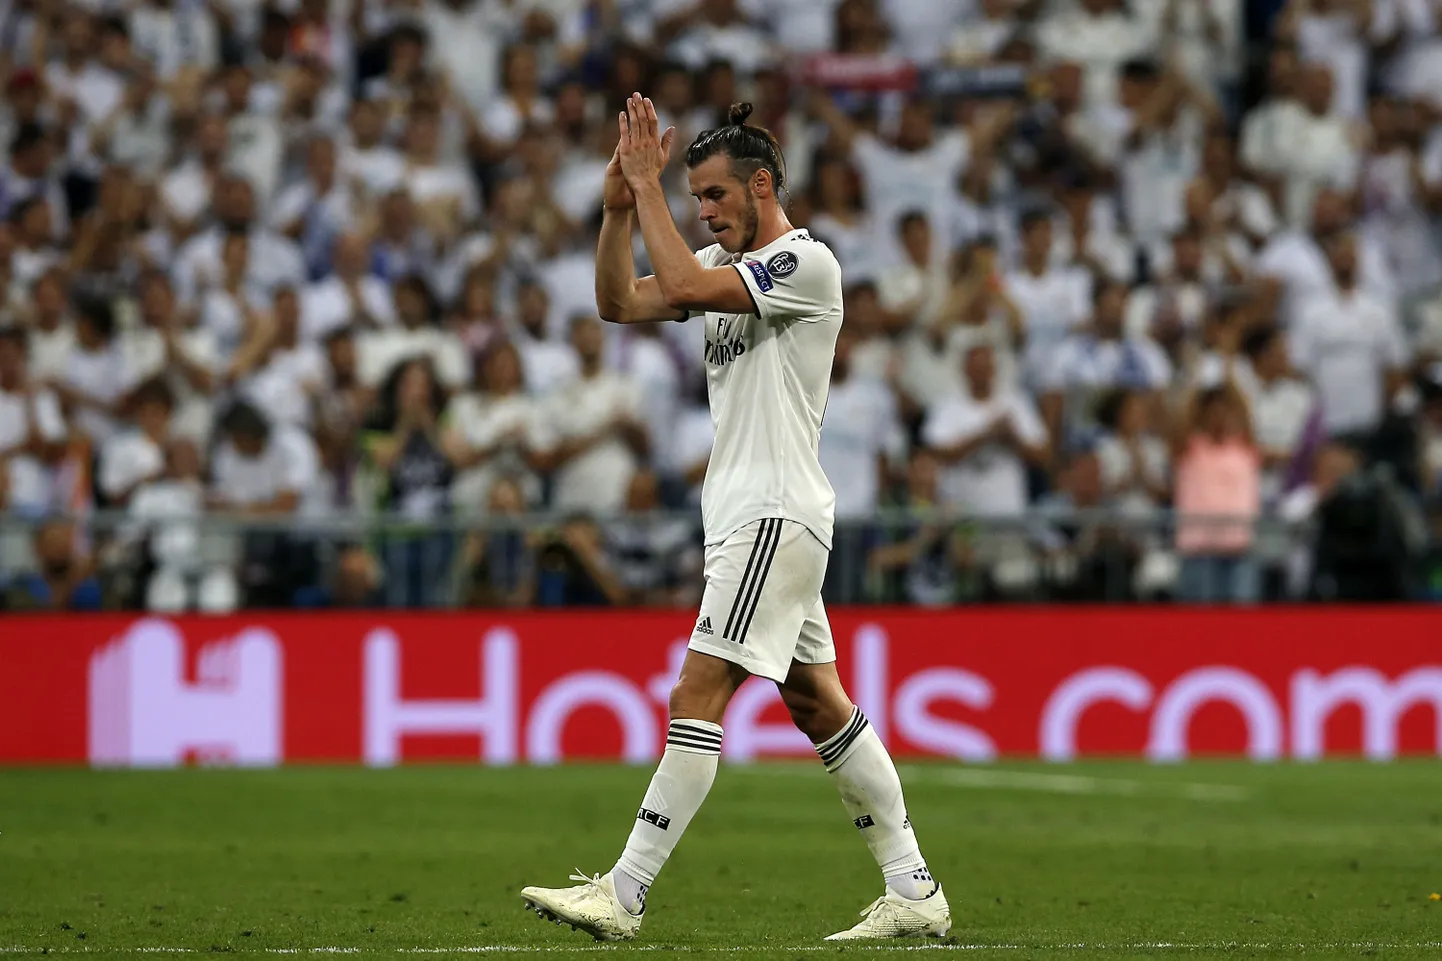 Real midfielder Gareth Bale applauds af the end of the Group G Champions League soccer match between Real Madrid and Roma at the Santiago Bernabeu stadium in Madrid, Spain, Wednesday Sept. 19, 2018. (AP Photo/Paul White)